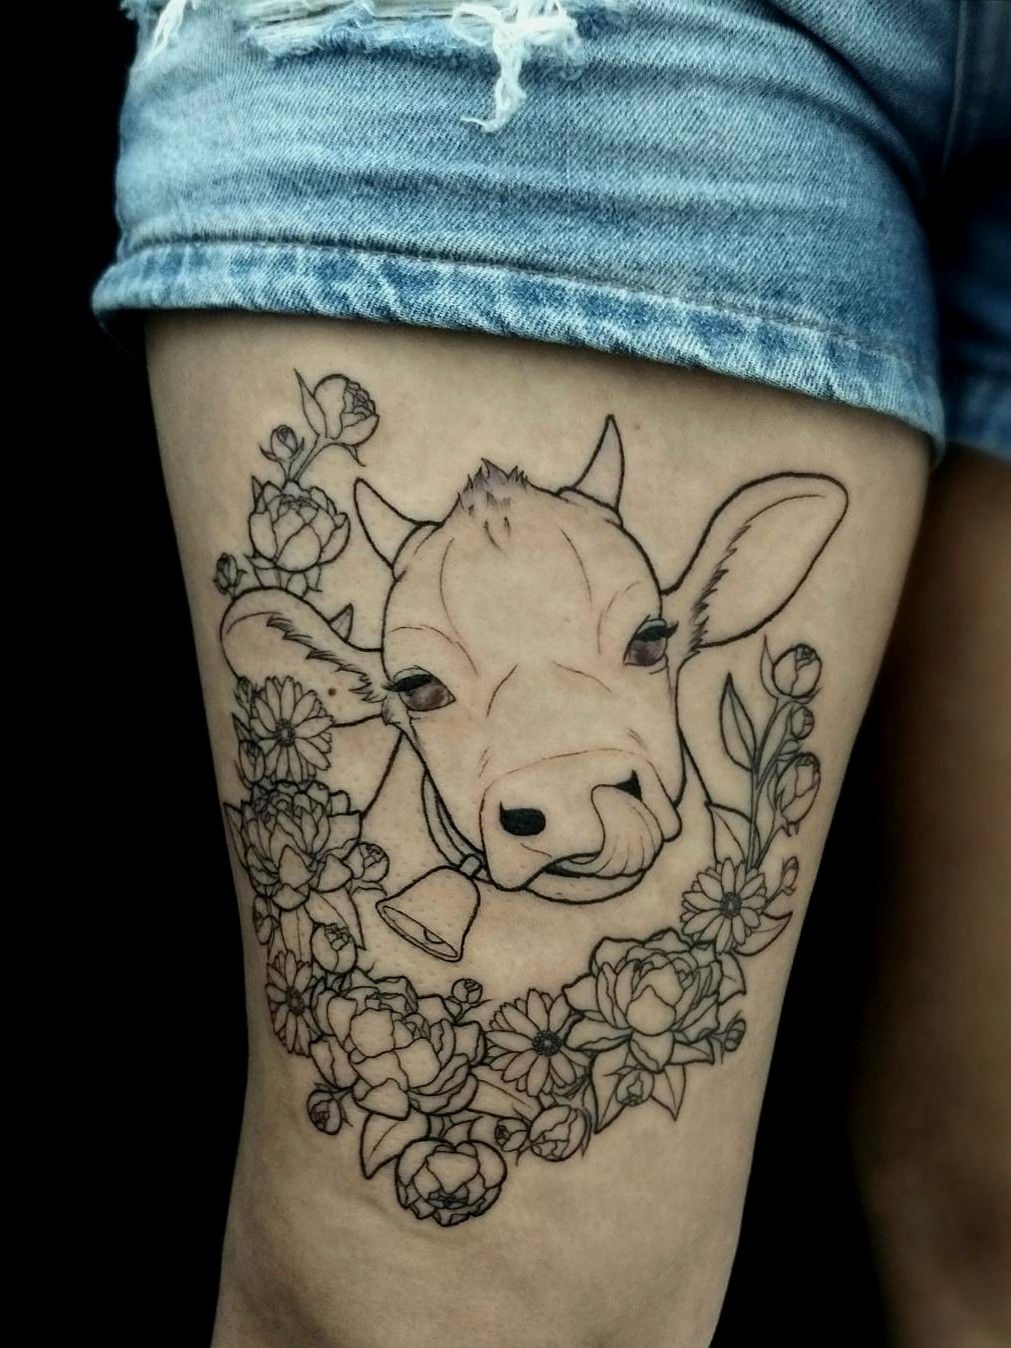 Cow tattoo on the inner arm